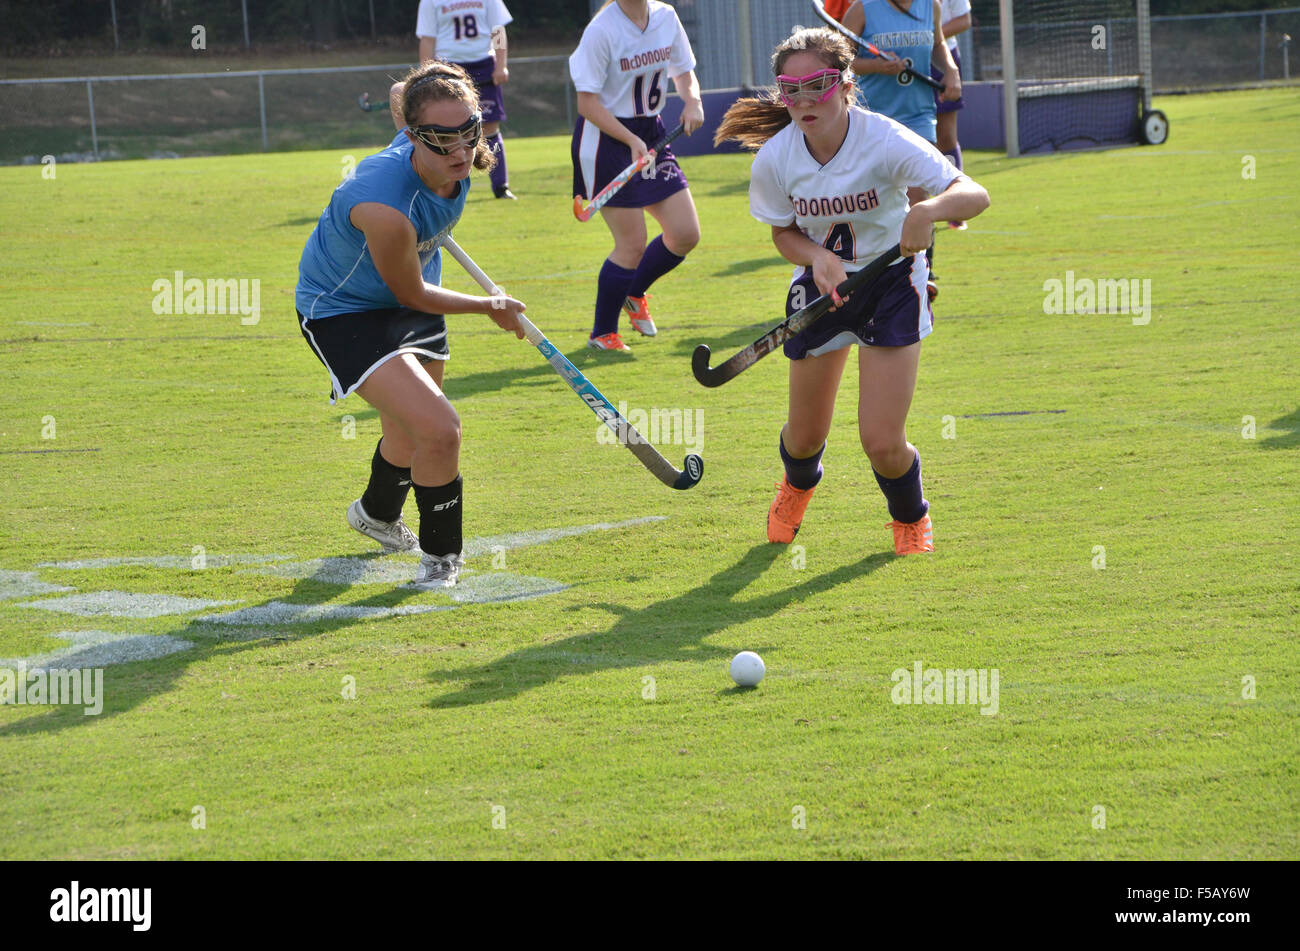 Girls playing field hockey in a high school game Stock Photo